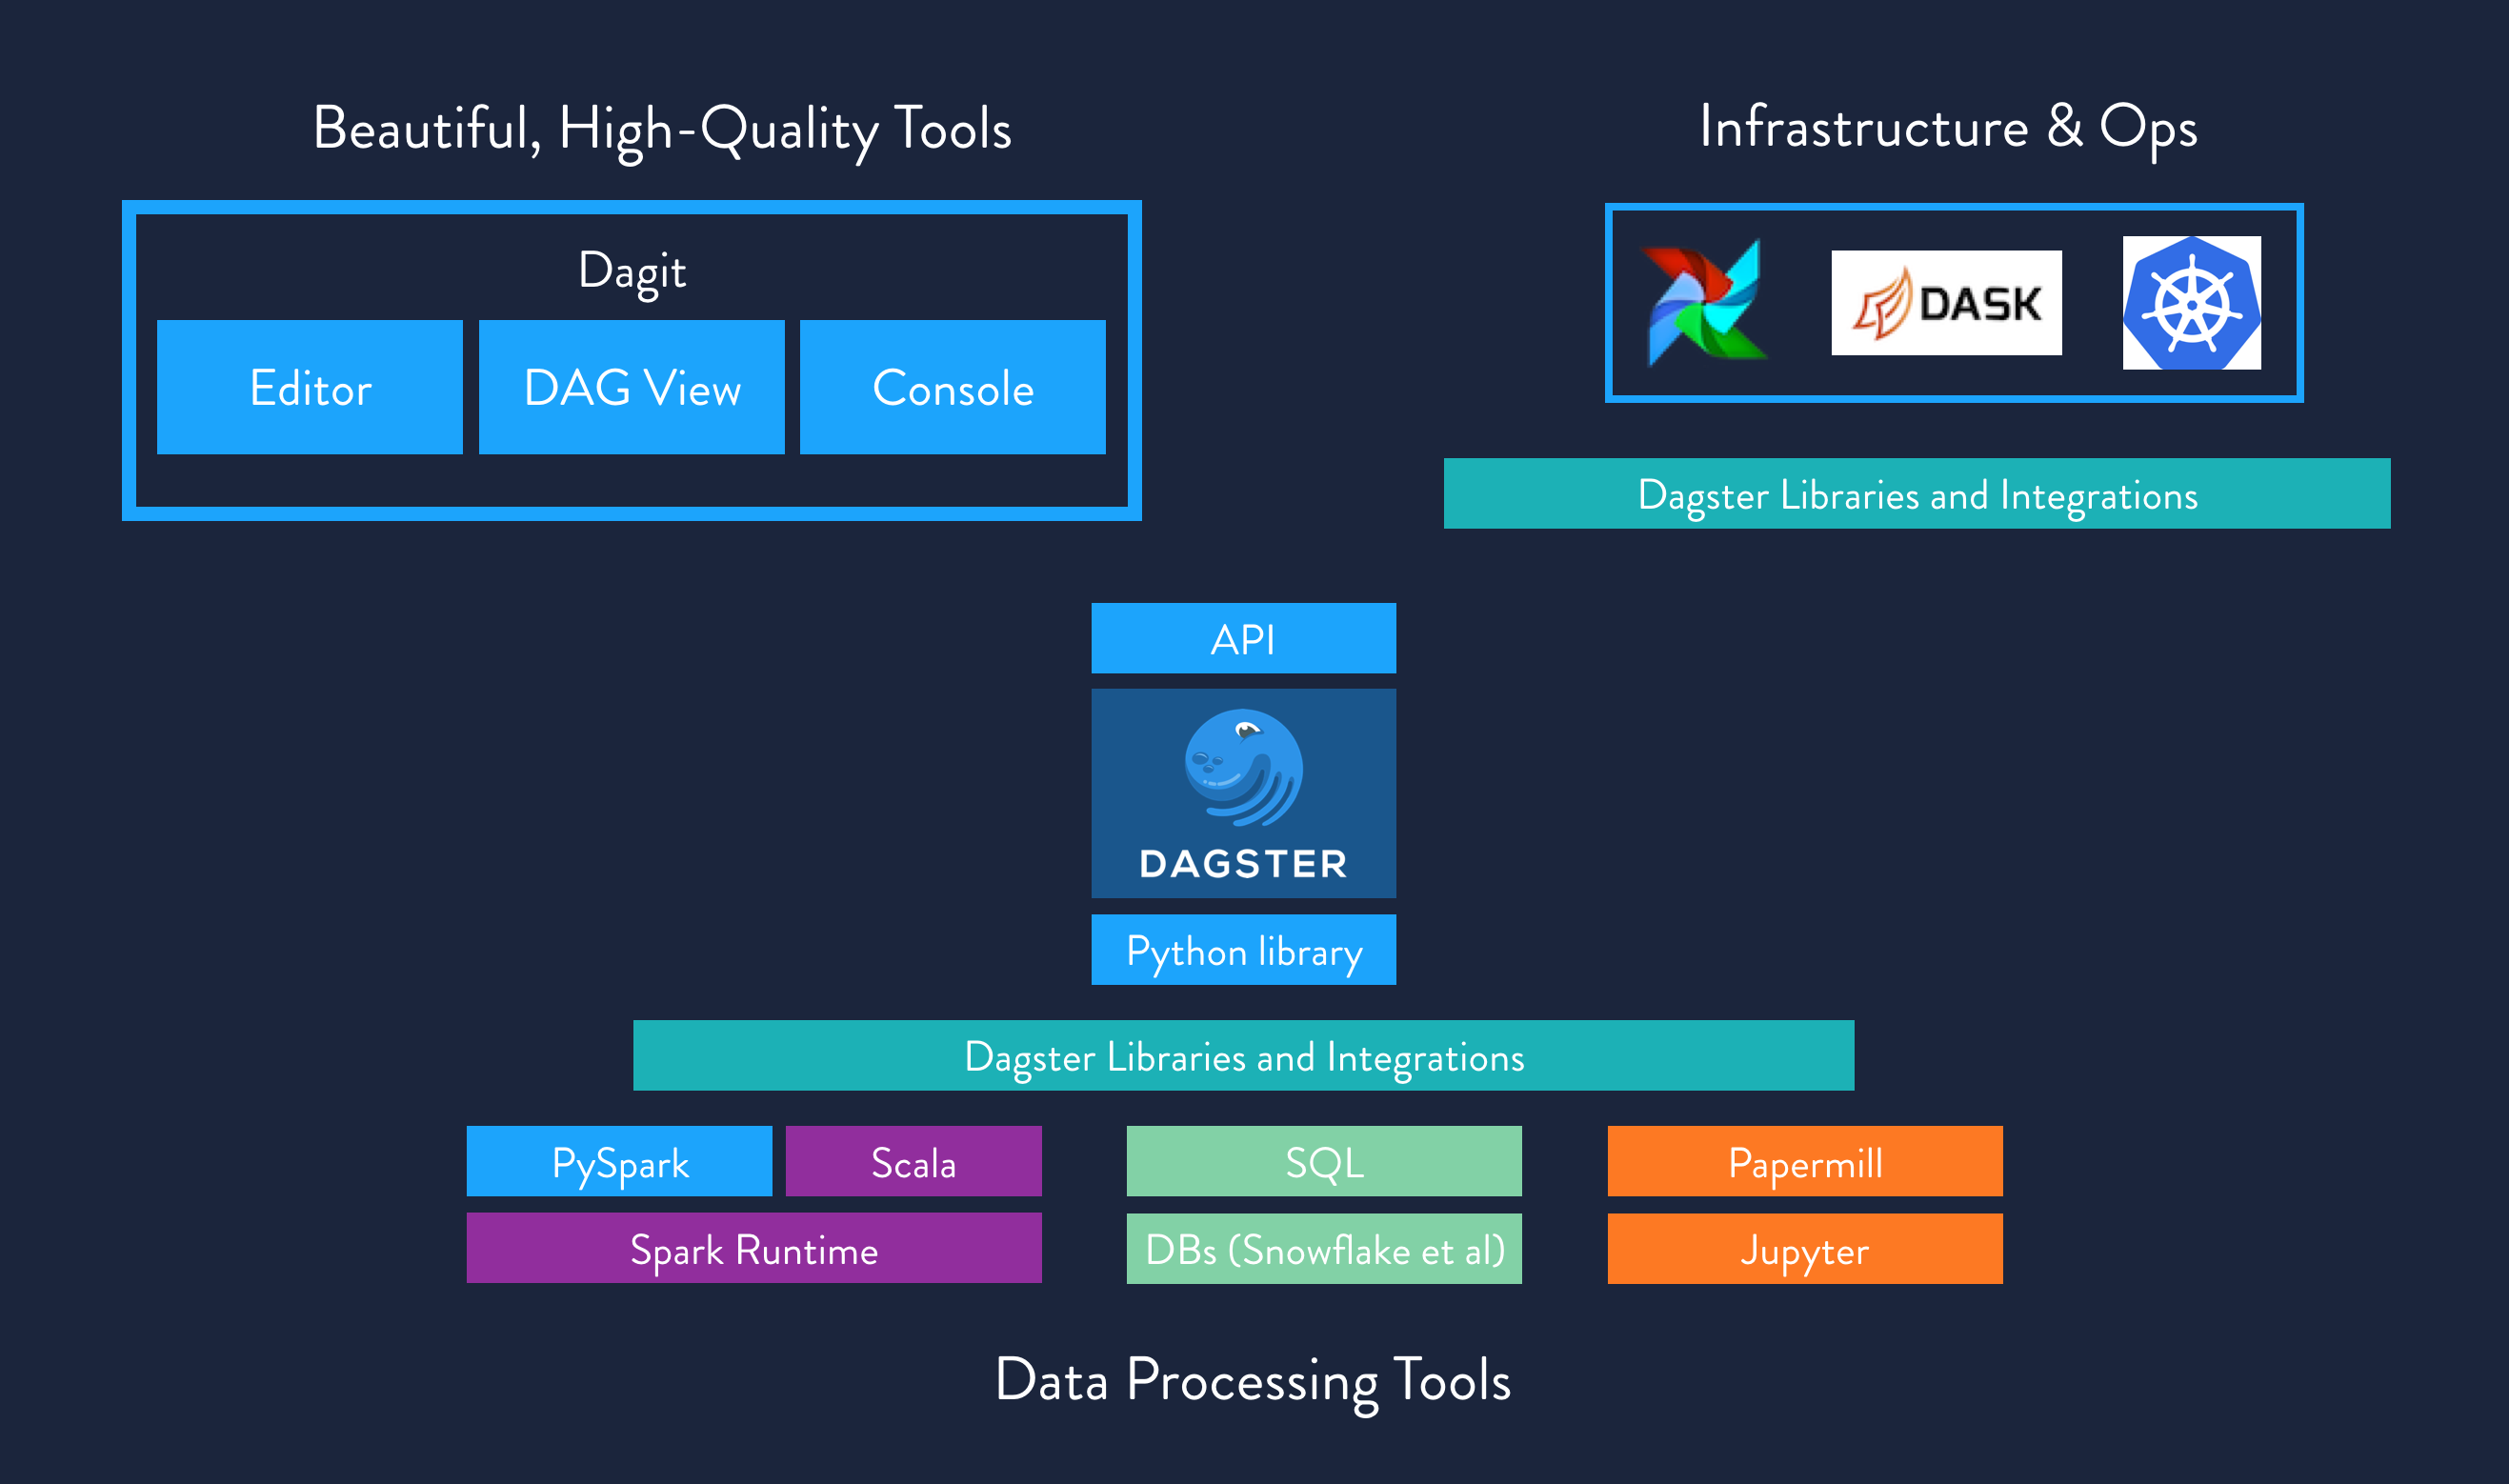 Dagster as a unifying abstraction seeks to serve as a powerful point of leverage in the data ecosystem.